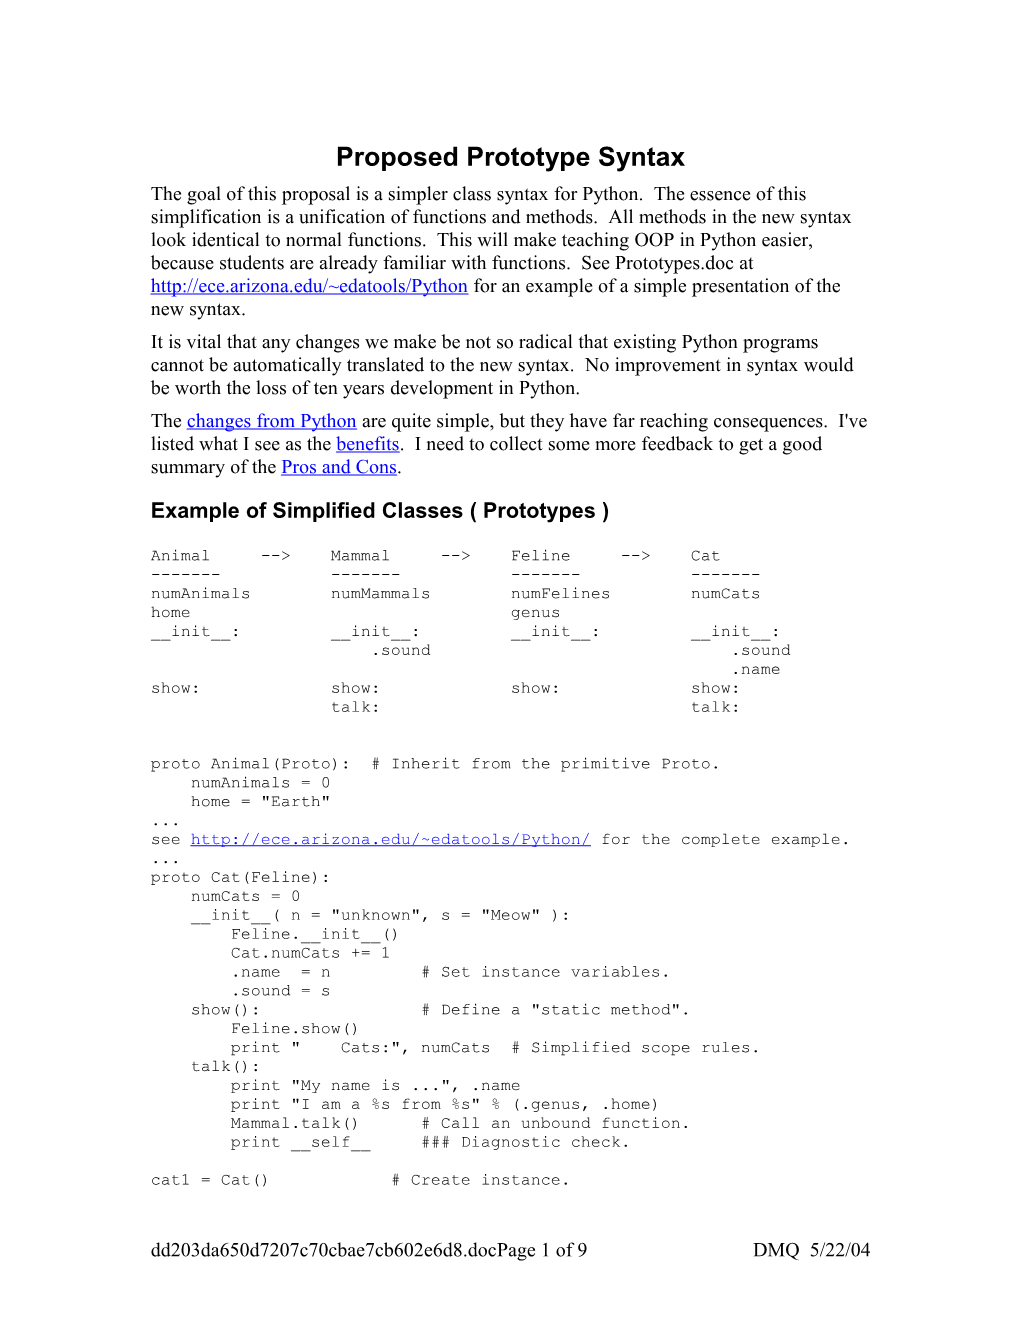 Proposed Prototype Syntax